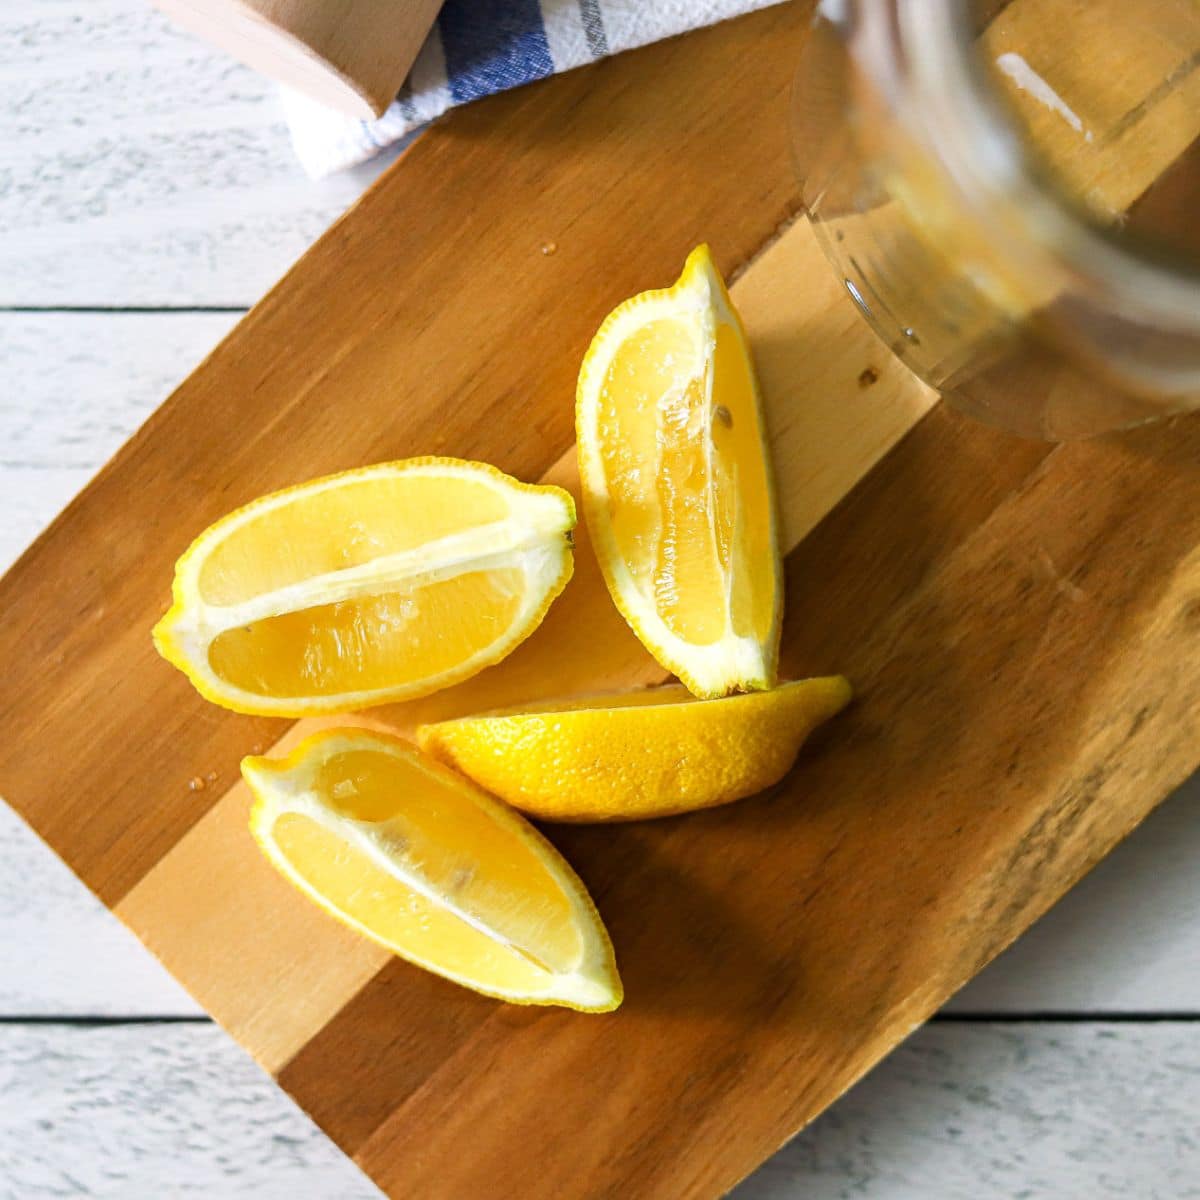 a lemon cut into wedges on a wooden cutting board